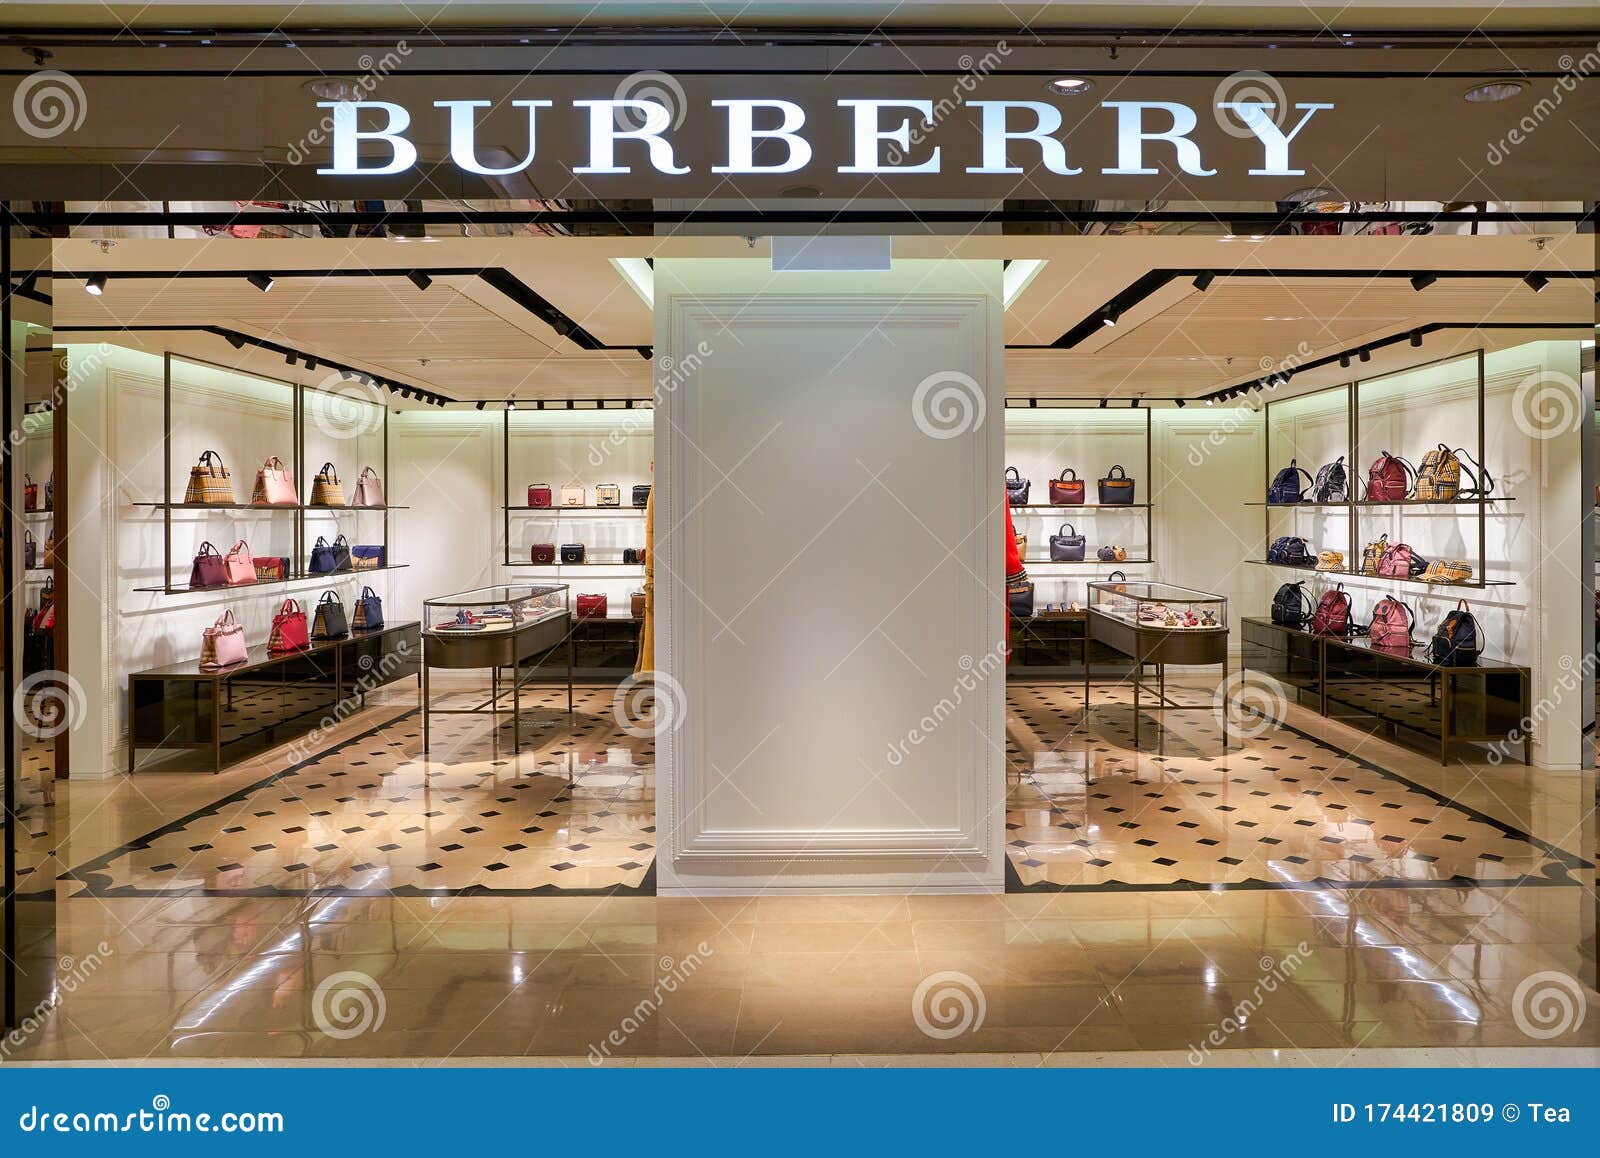 burberry istanbul outlet